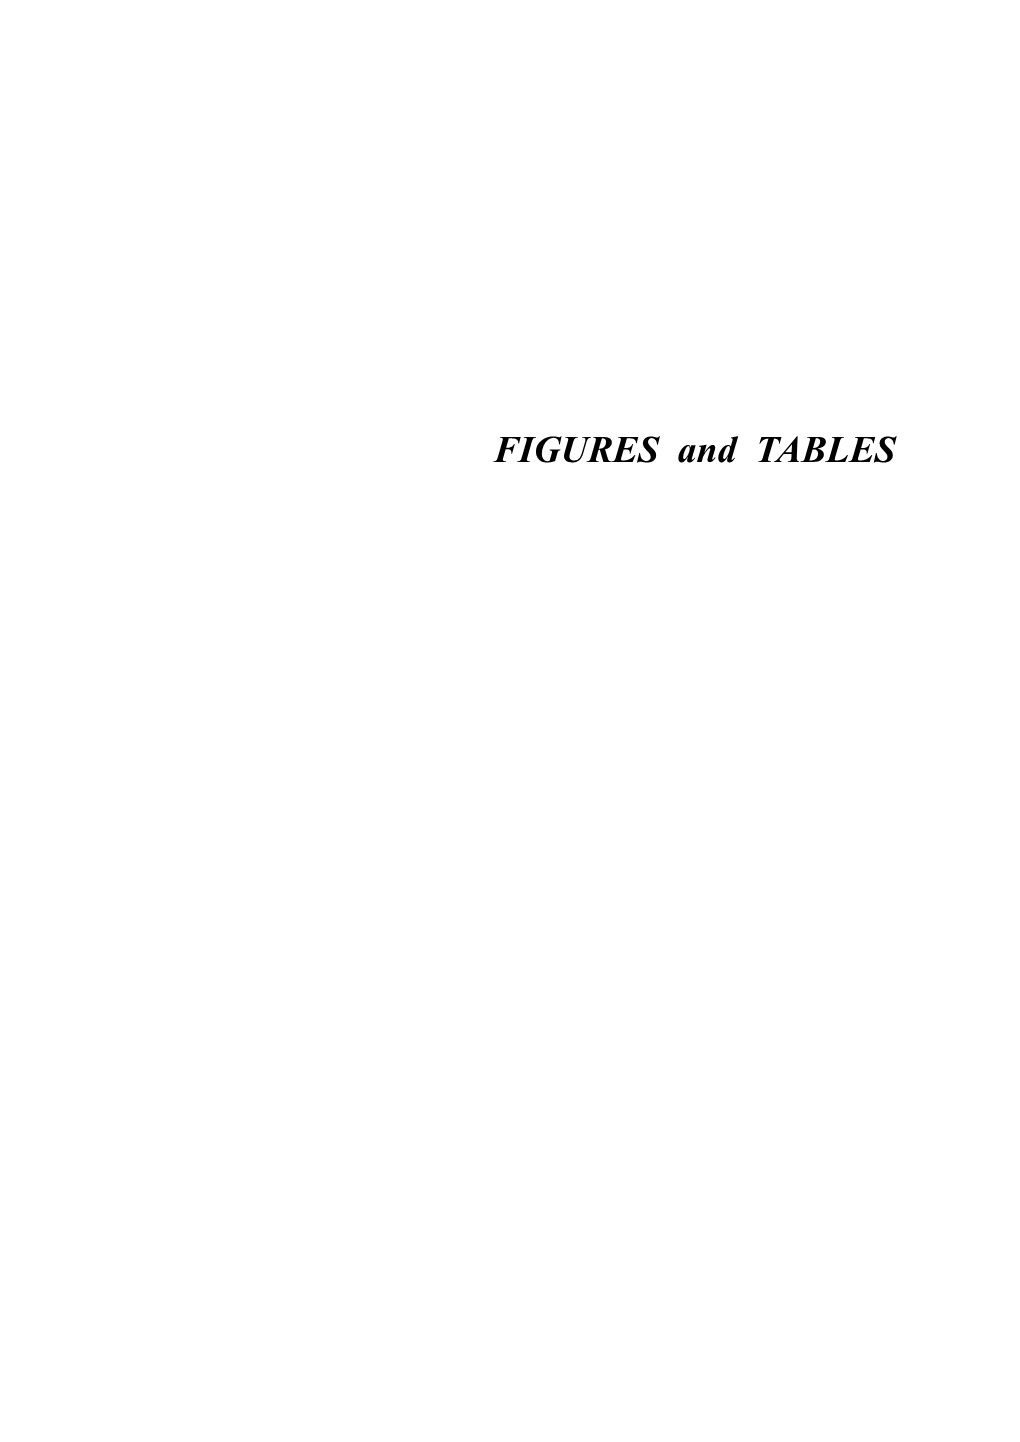 FIGURES and TABLES